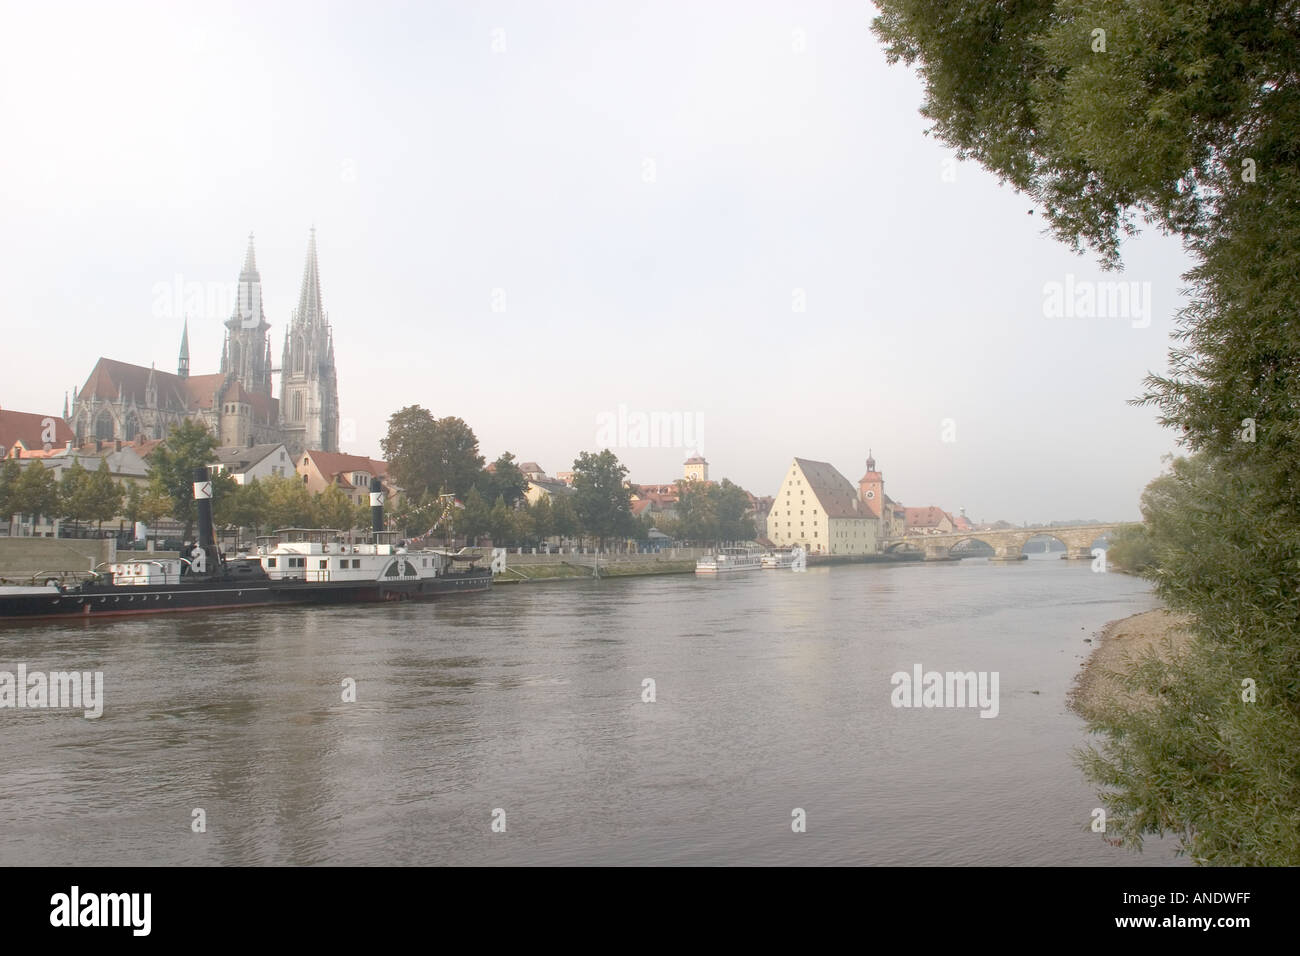 Beautiful misty view of the ancient city of Regensburg on the Danube River Germany Western Europe Stock Photo